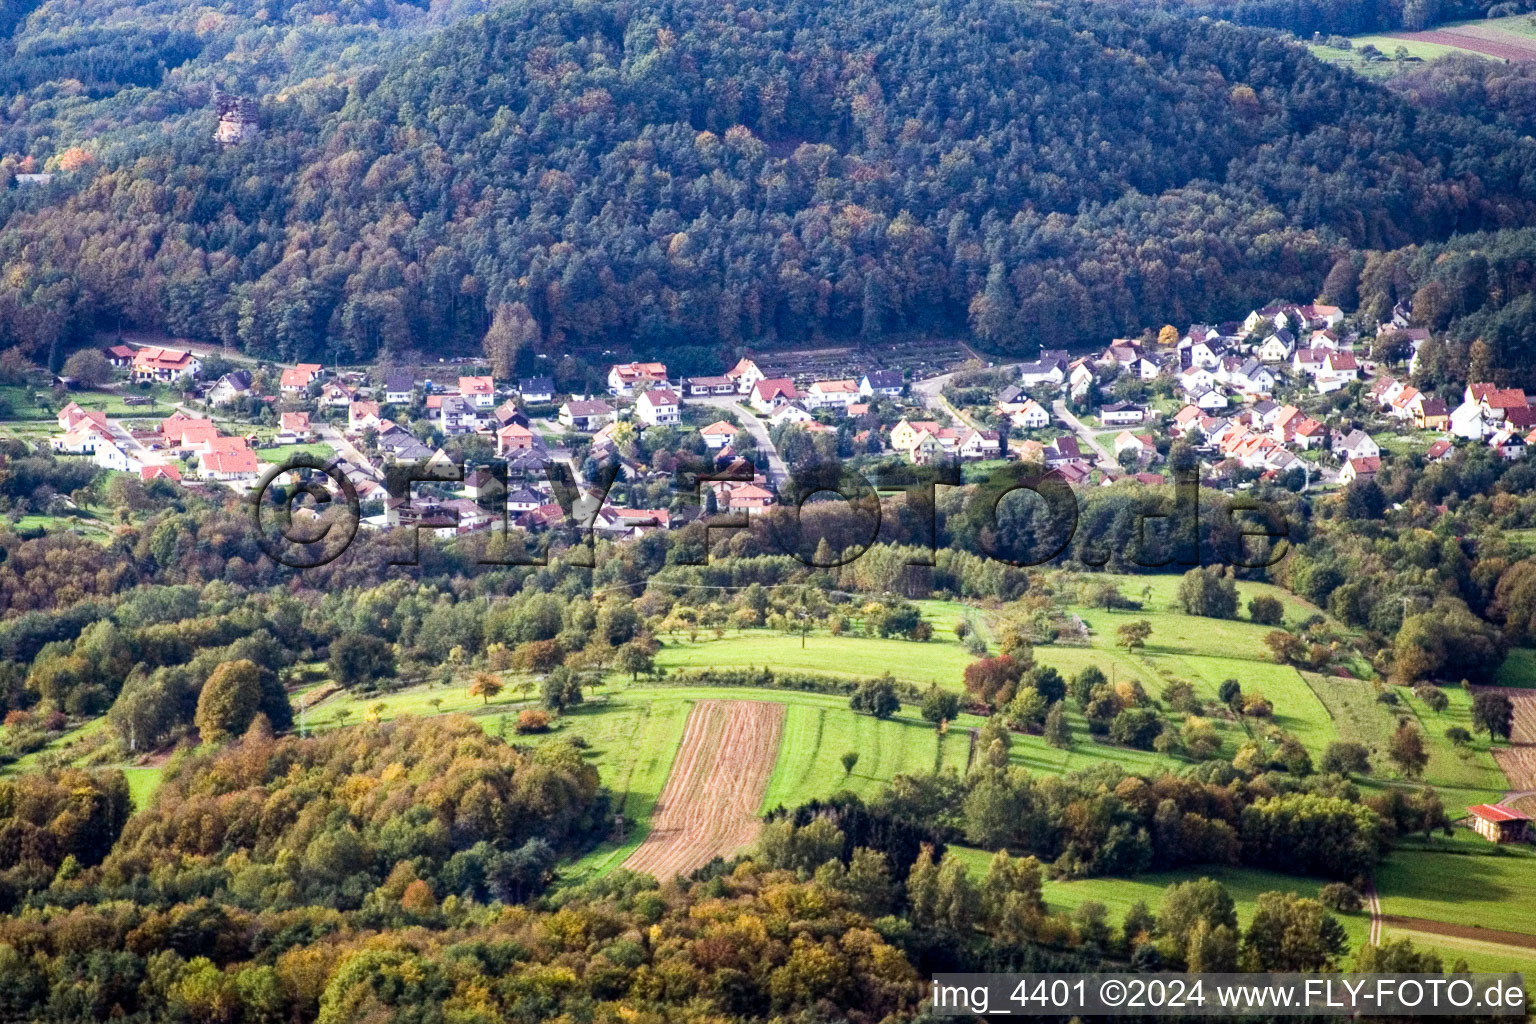 District Stein in Gossersweiler-Stein in the state Rhineland-Palatinate, Germany from above